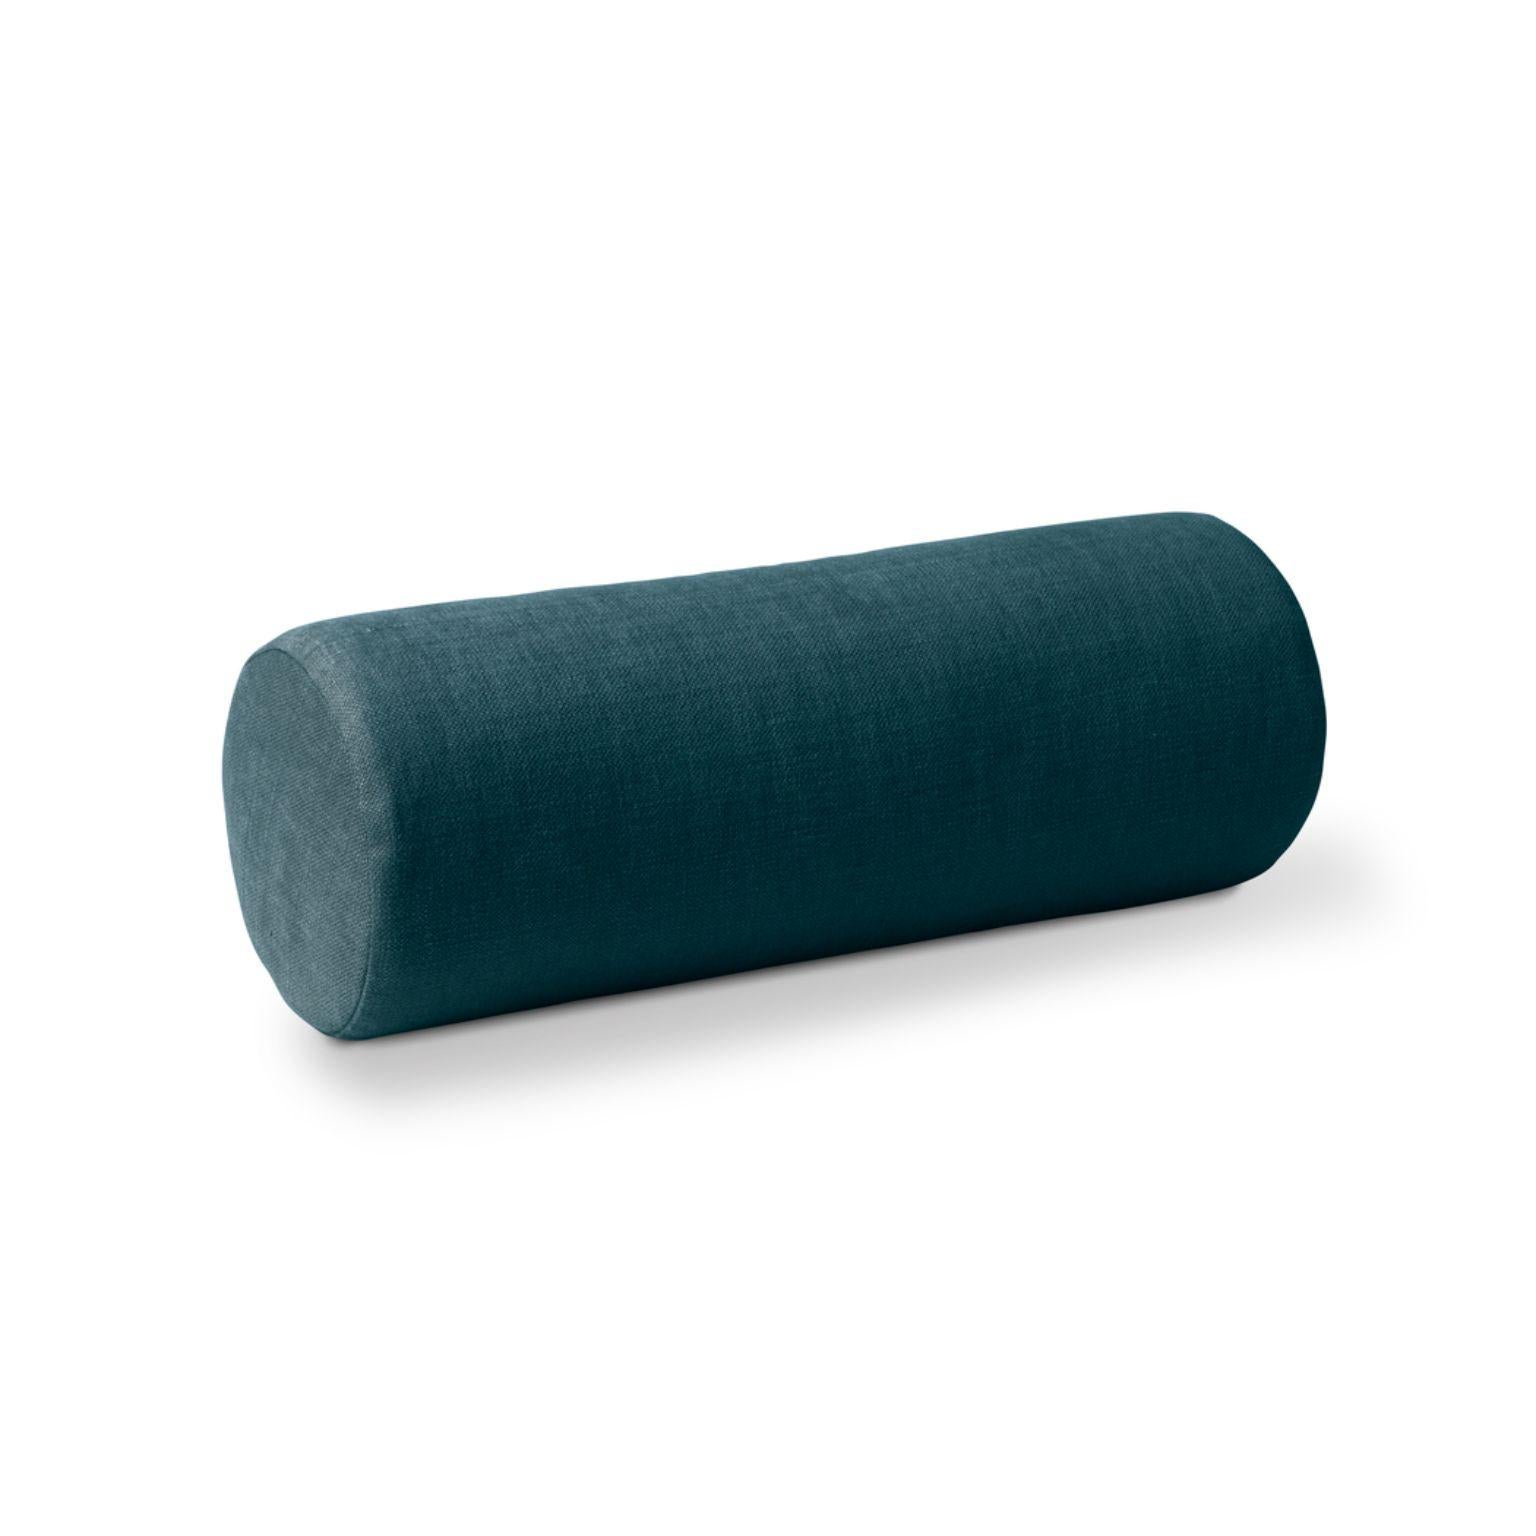 Galore cushion dark teal by Warm Nordic
Dimensions: D16 x H 46 cm
Material: Textile upholstery, Granulate and feathers filling.
Weight: 0.9 kg
Also available in different colours and finishes. 

An elegant bolster cushion, which matches the